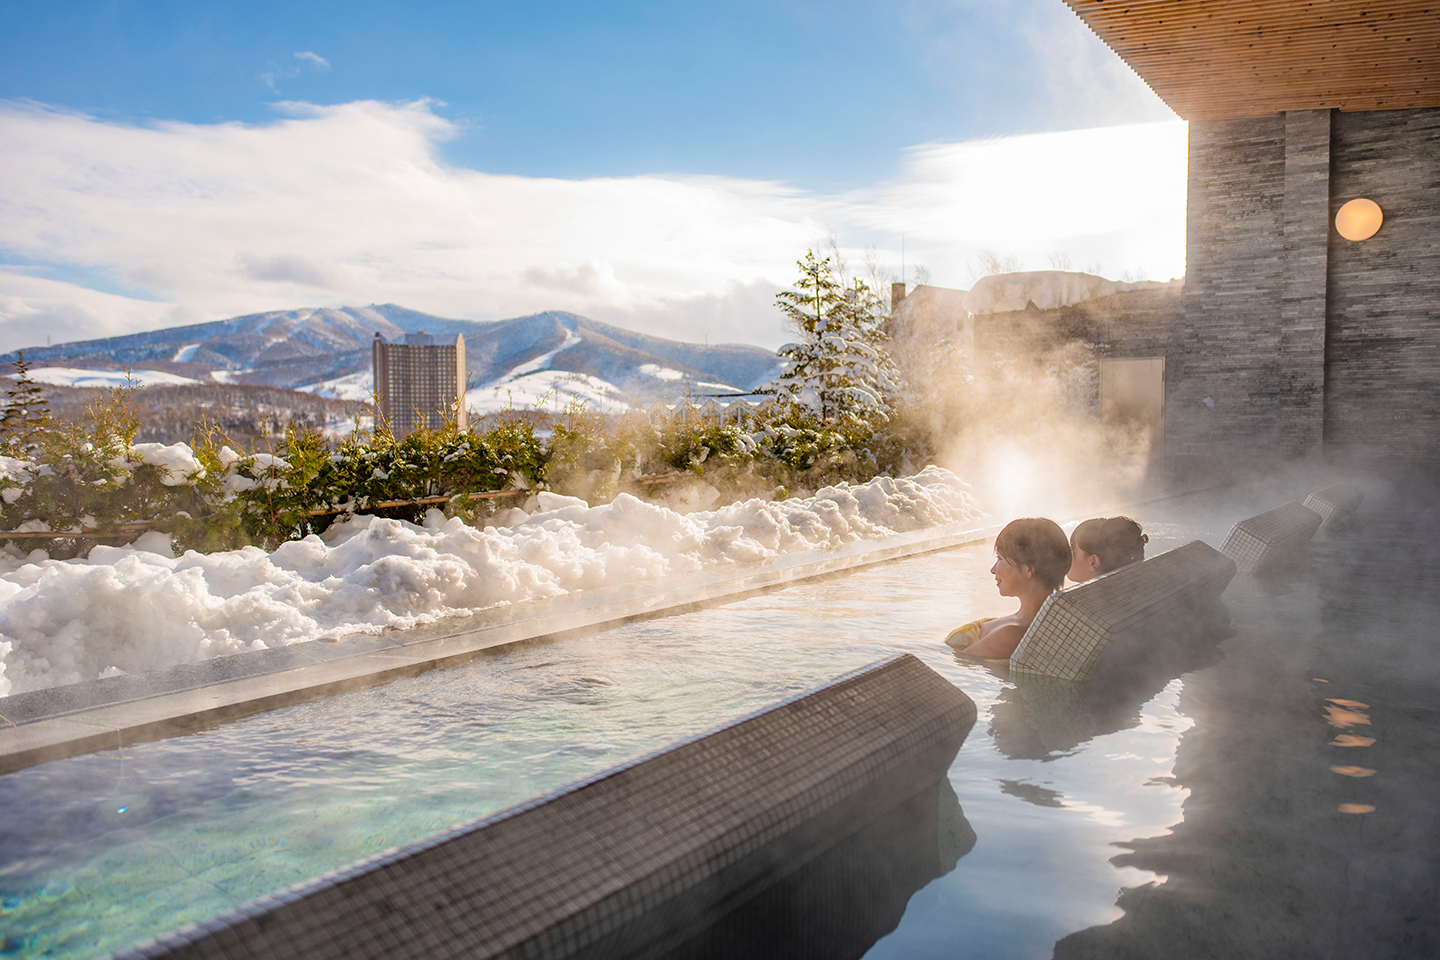 Outdoor bath imbued with a sense of openness. Enjoy the seasonal scenery and stadium of stars while soaking in the gentle hot spring